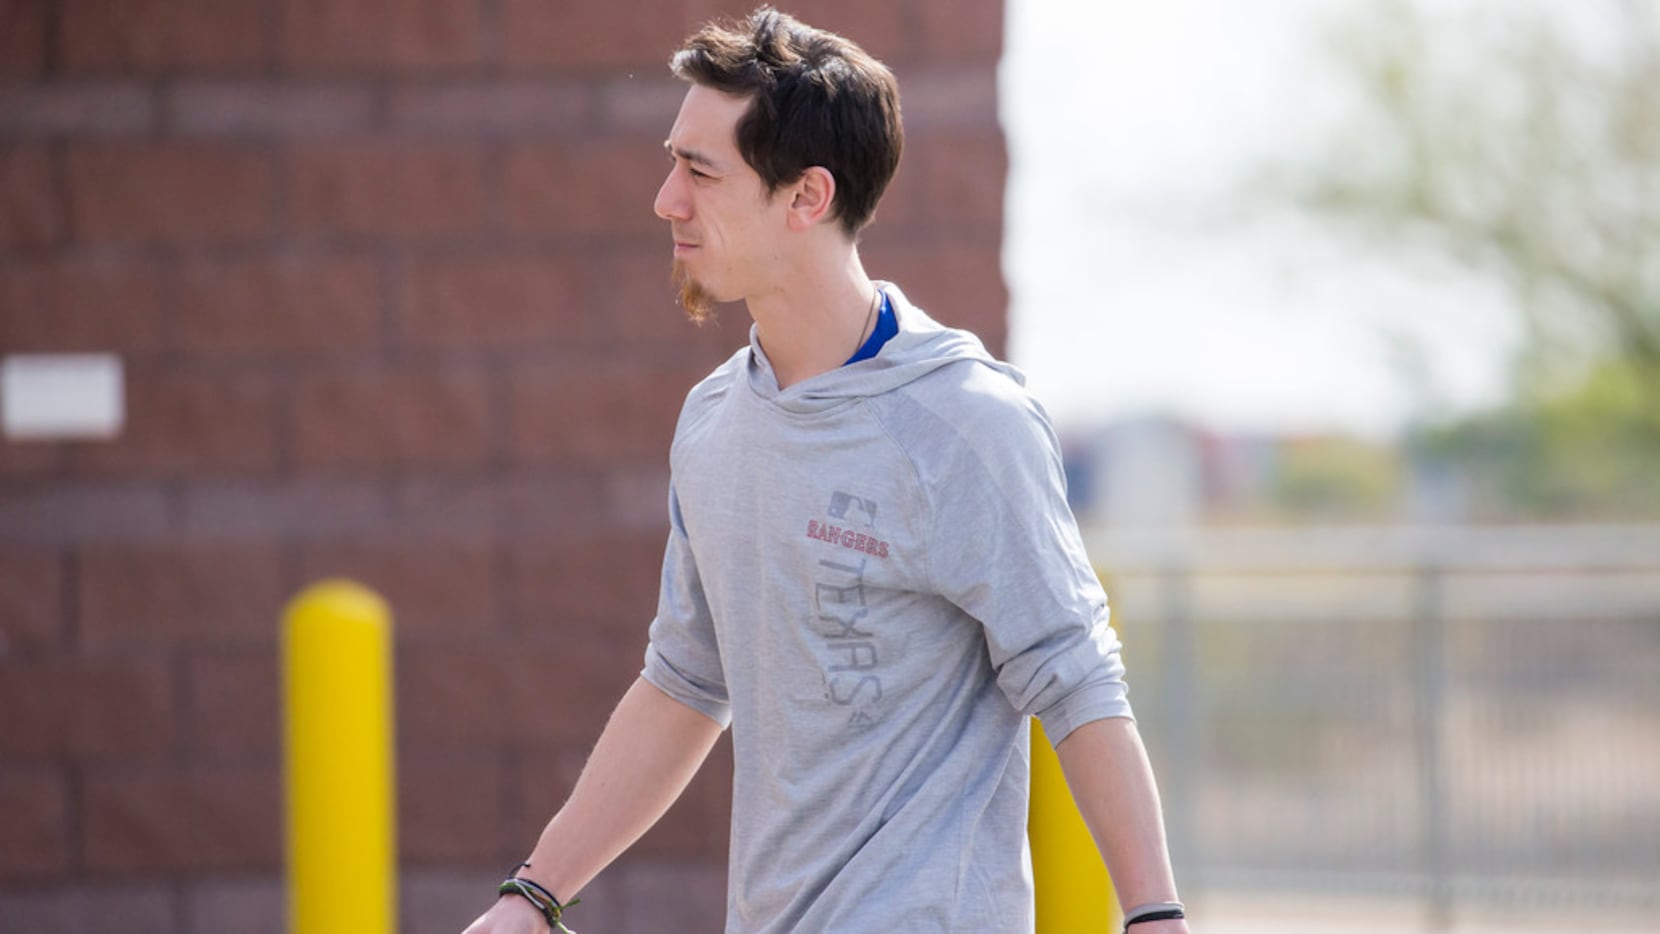 Tim Lincecum joins Rangers camp: 'I can't wait to see him throw again